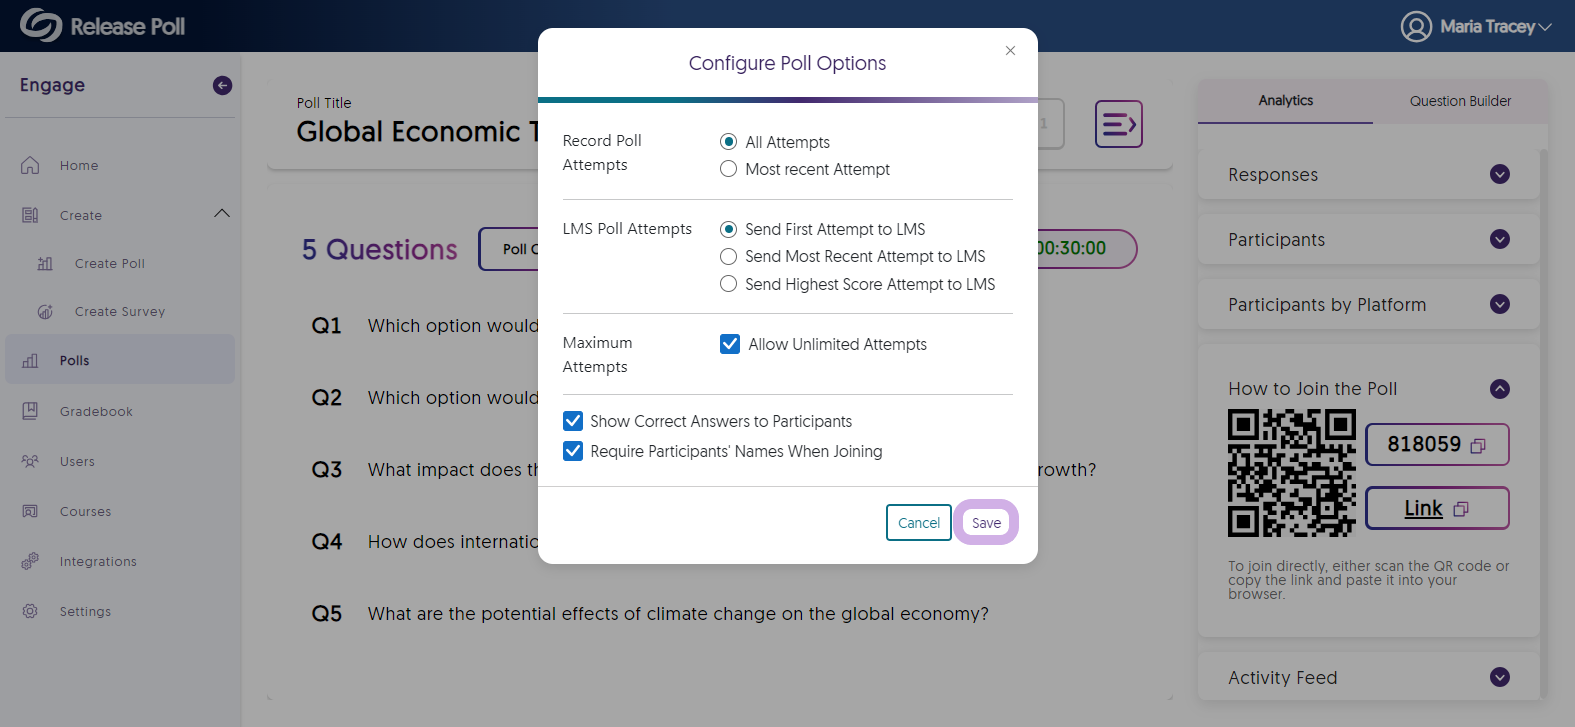 The configure Poll options modal shows options for how attempts should be recorded and sent to the LMS.